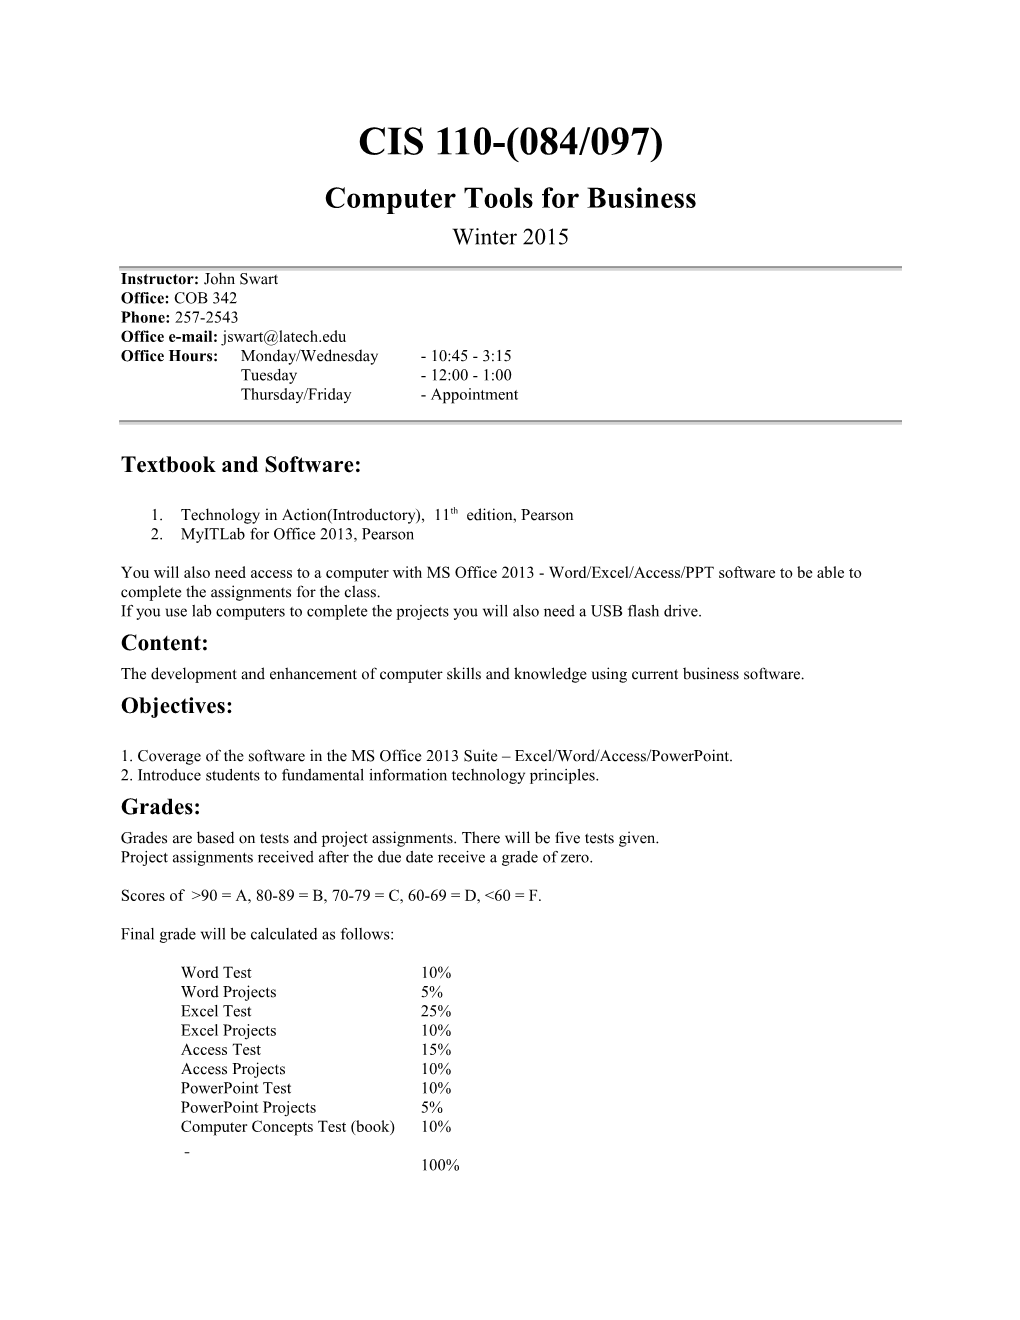 Computer Tools for Business